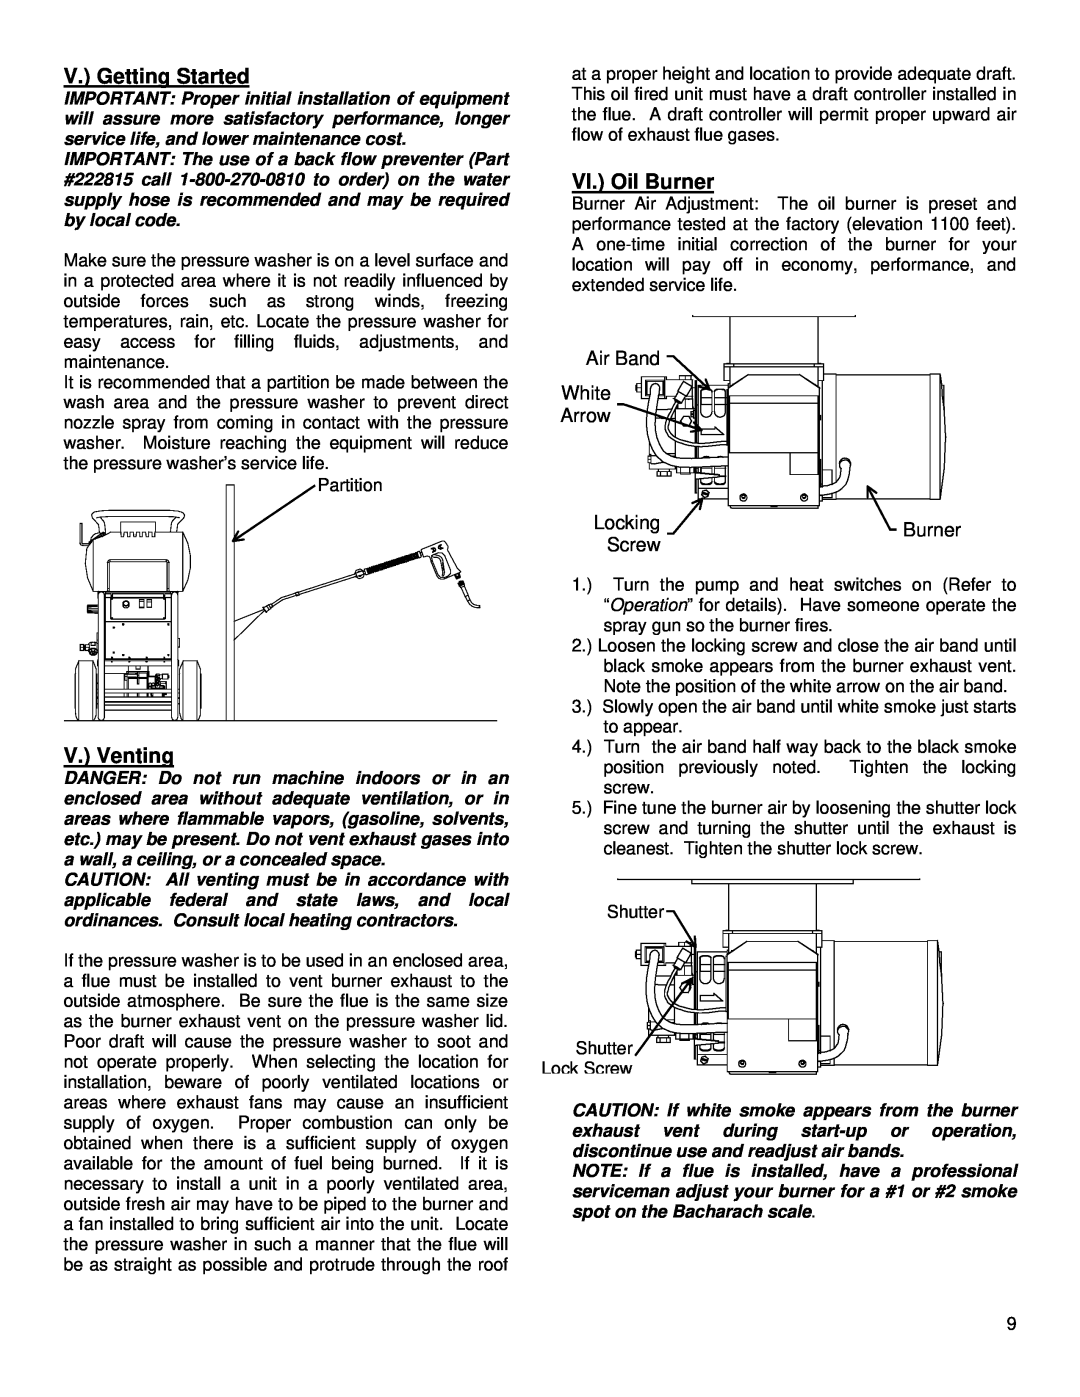 North Star MHOTPWR specifications V. Getting Started, V. Venting, VI. Oil Burner, Air Band White Arrow, Locking, Screw 